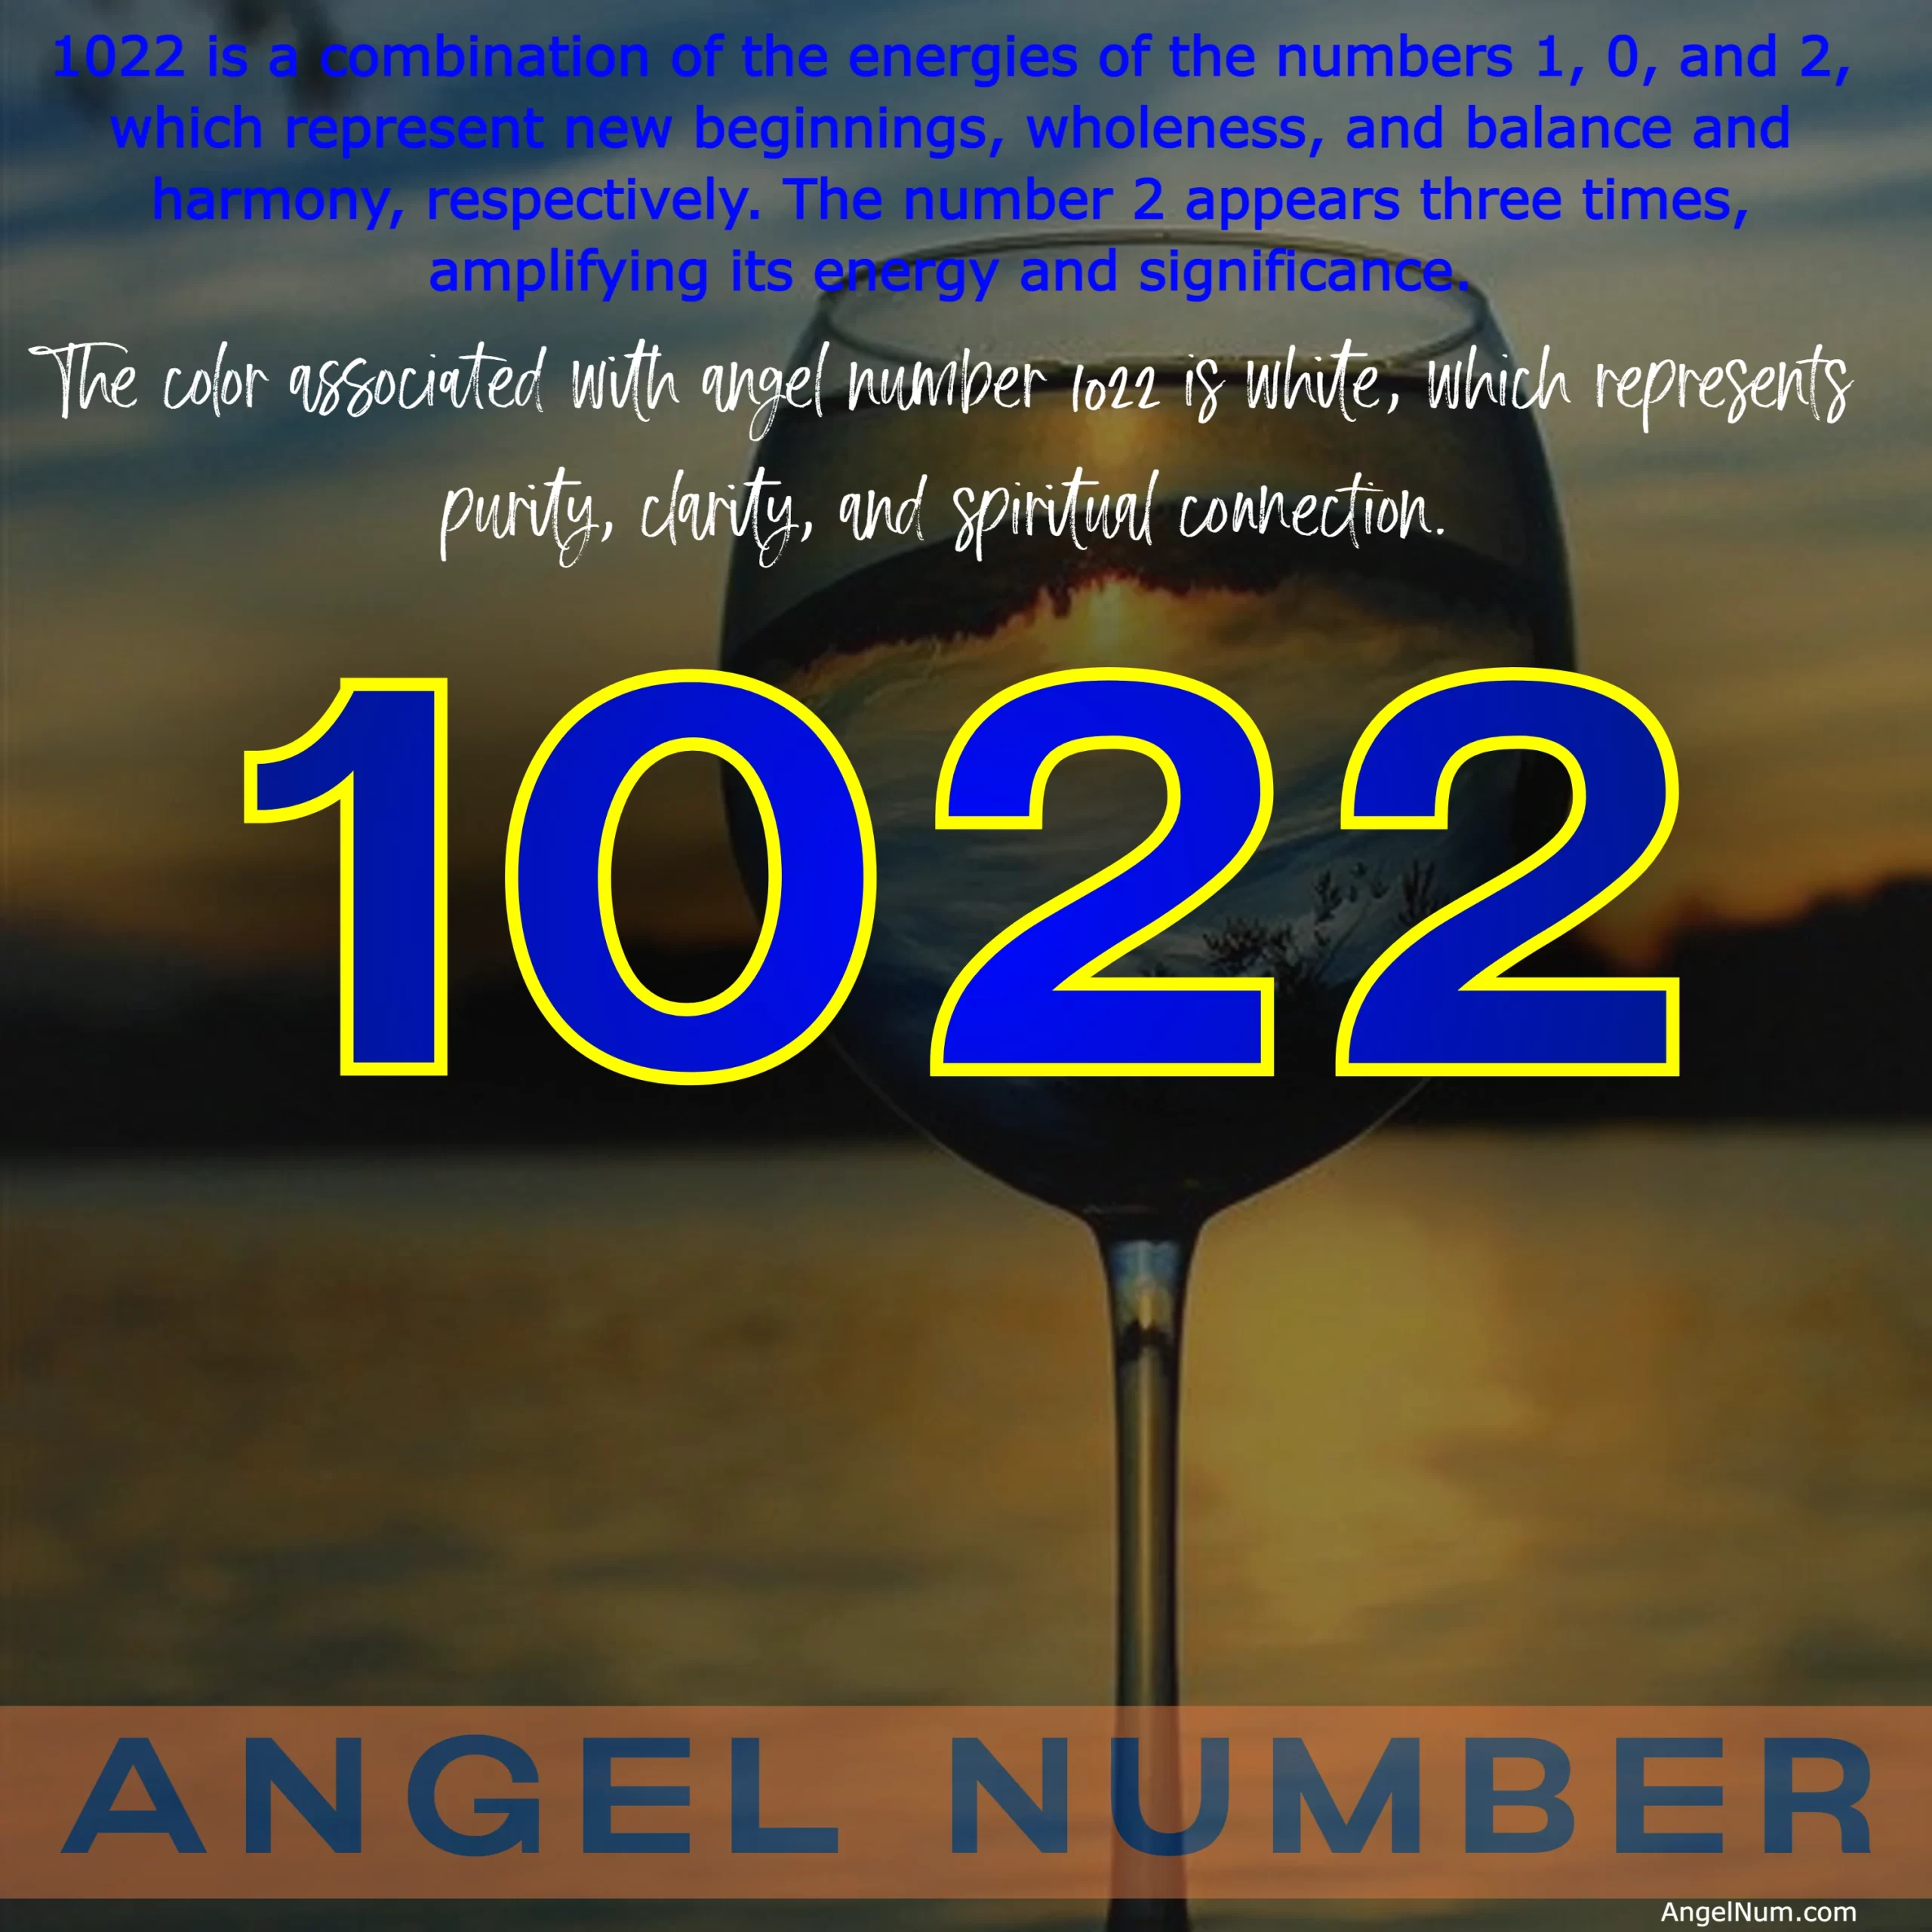 Angel Number 1022: The Spiritual Meaning and Significance